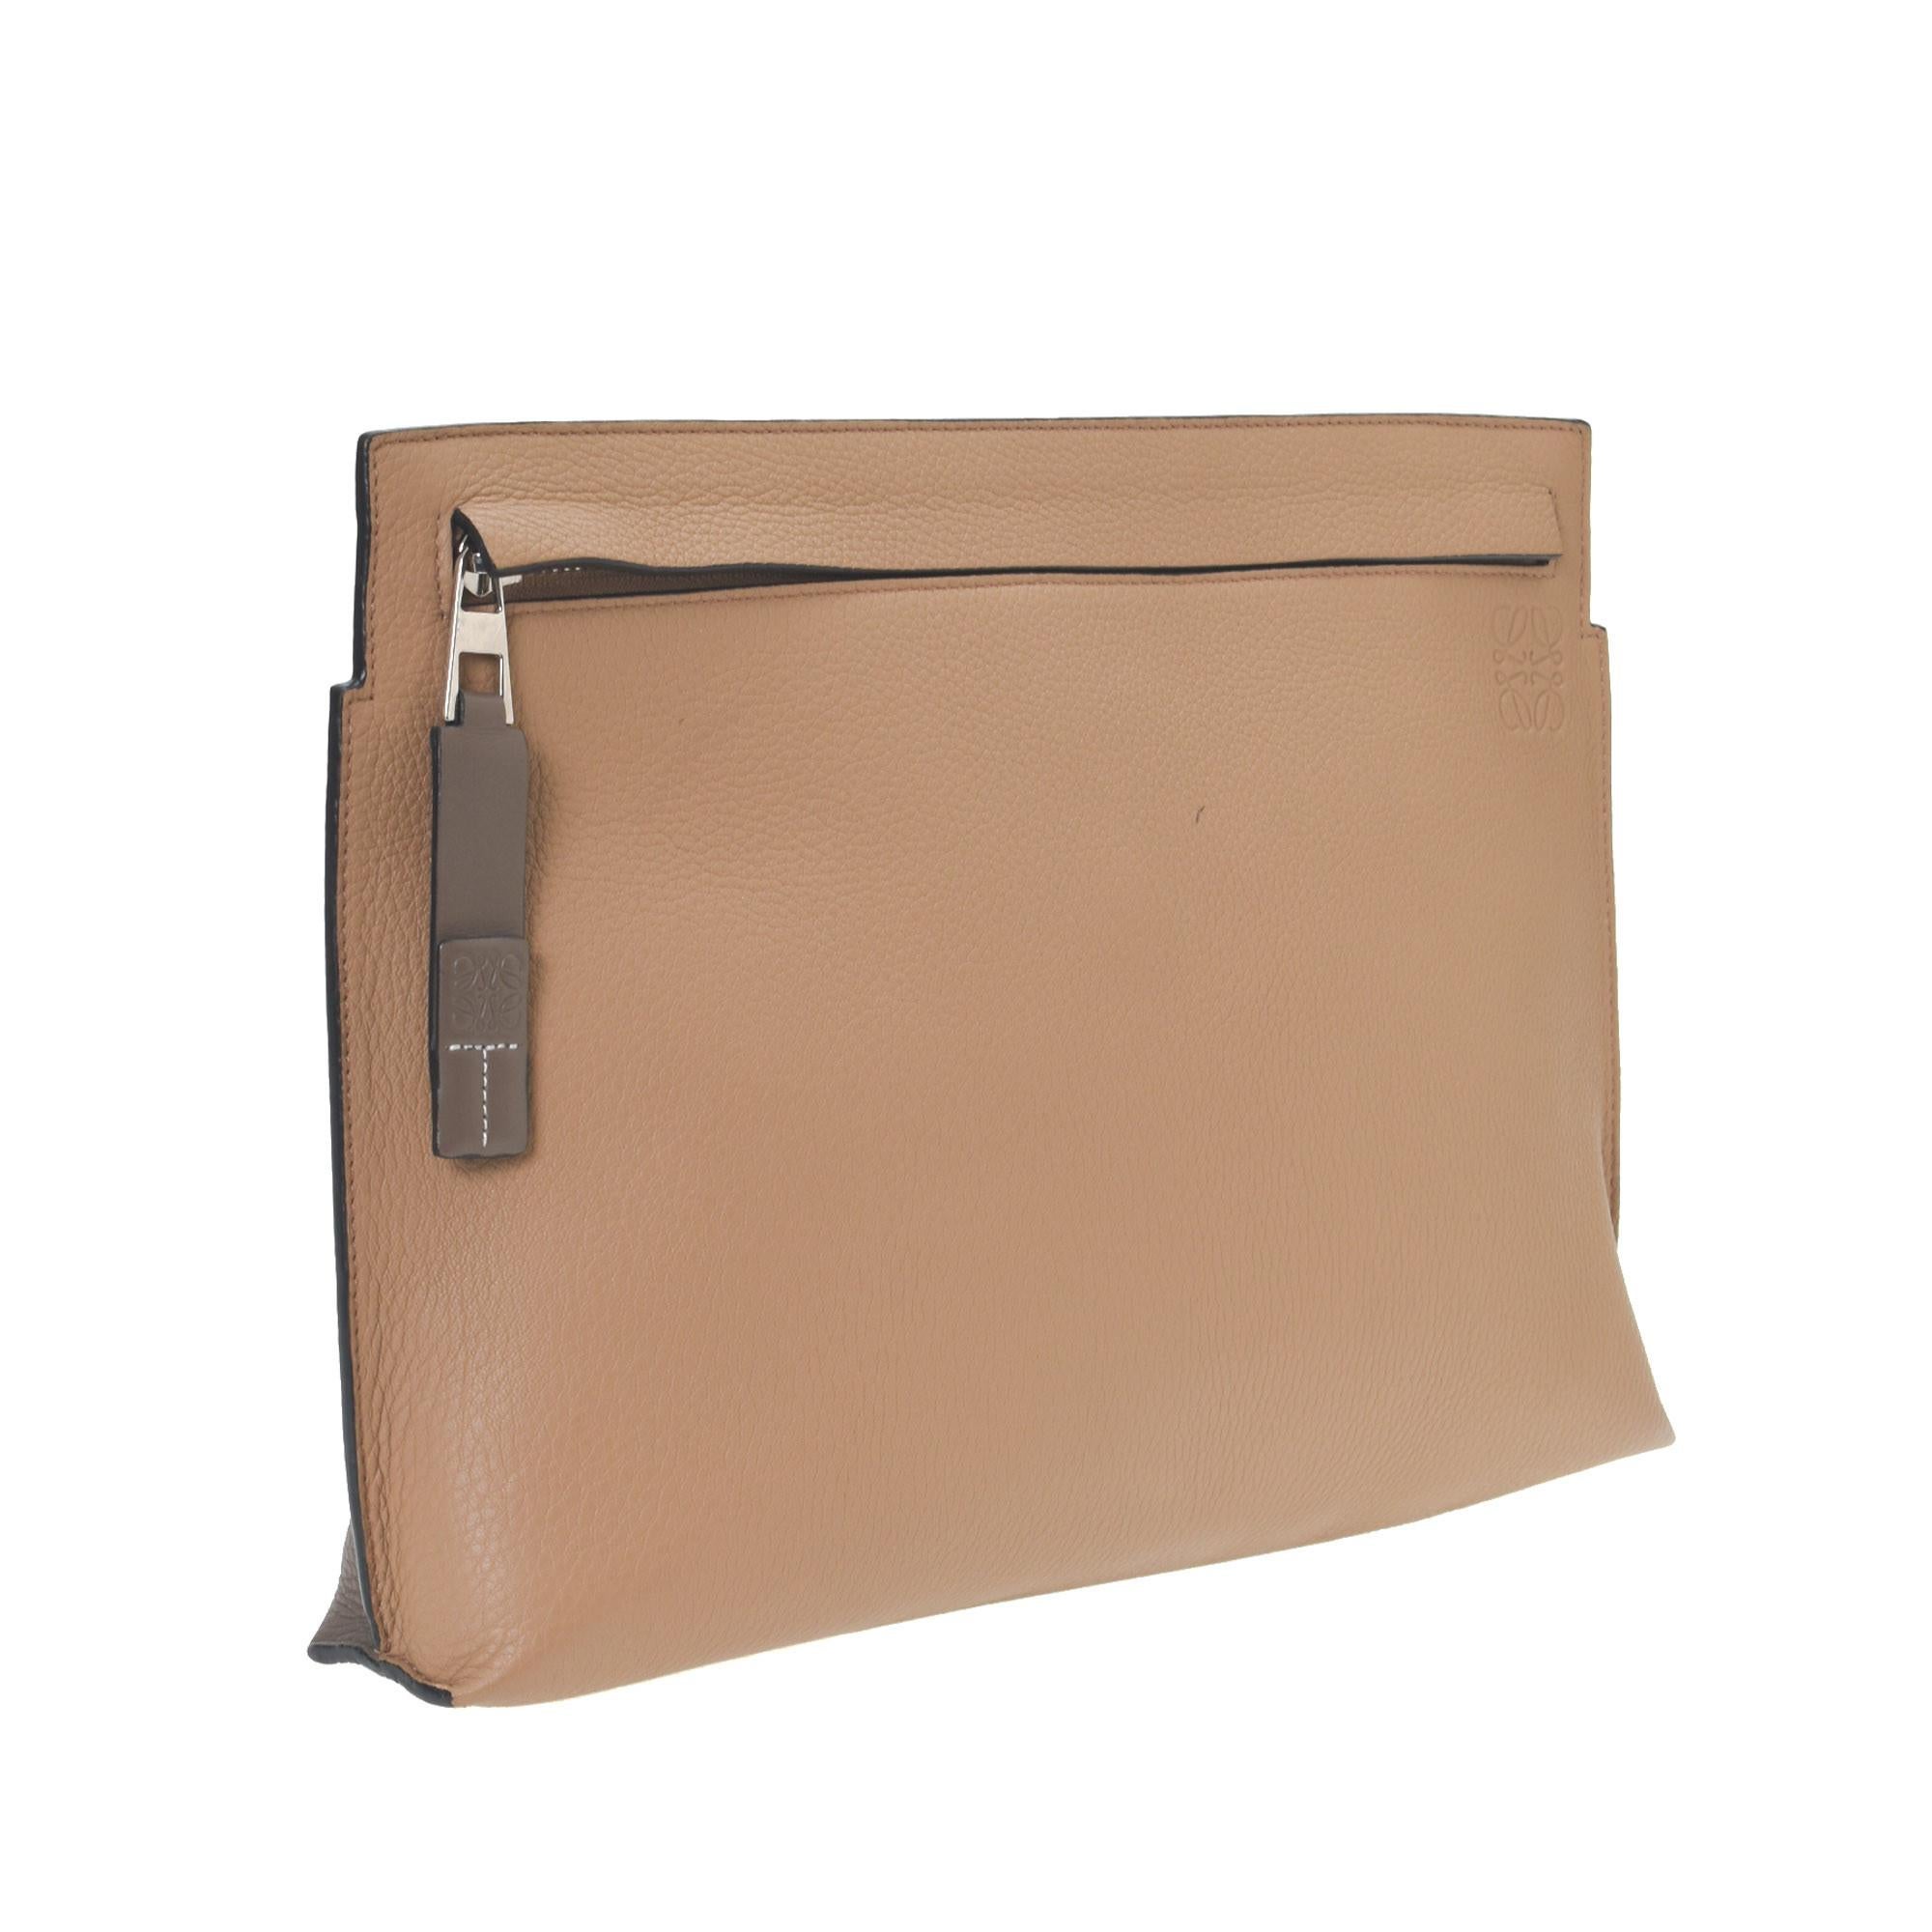 This exquisite Loewe wristlet comes in beige calf leather. The authenticity of this vintage Loewe clutch is guaranteed by LXRandCo. 
